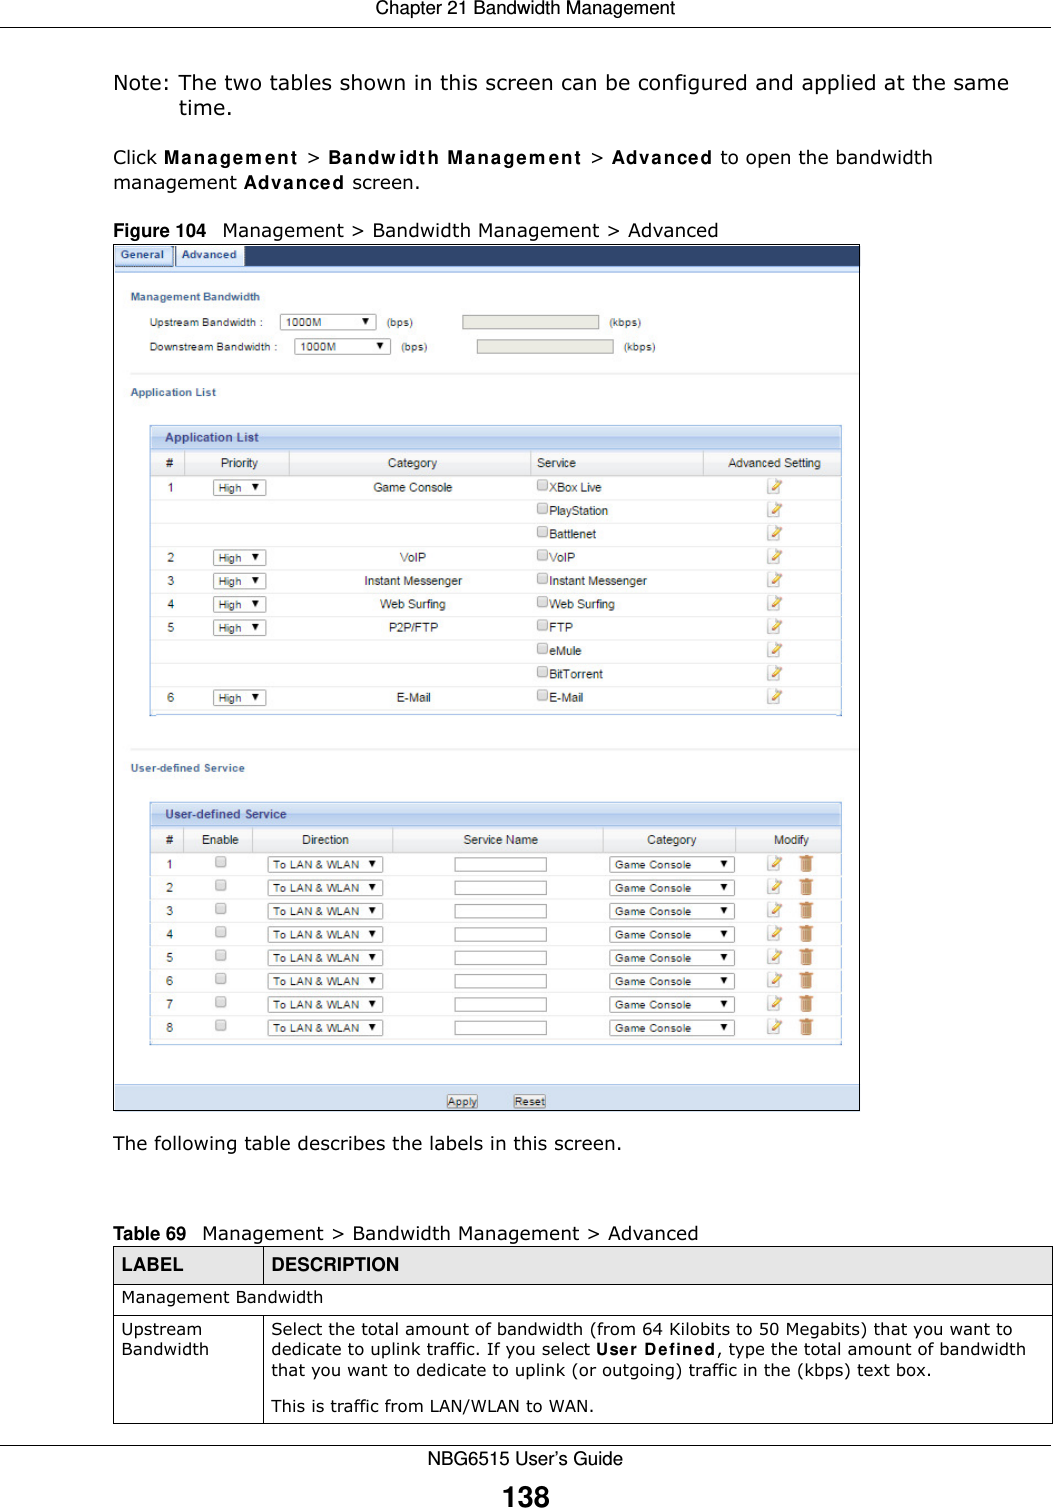 Chapter 21 Bandwidth ManagementNBG6515 User’s Guide138Note: The two tables shown in this screen can be configured and applied at the same time. Click Management &gt; Bandwidth Management &gt; Advanced to open the bandwidth management Advanced screen.Figure 104   Management &gt; Bandwidth Management &gt; Advanced The following table describes the labels in this screen.Table 69   Management &gt; Bandwidth Management &gt; Advanced LABEL DESCRIPTIONManagement BandwidthUpstream BandwidthSelect the total amount of bandwidth (from 64 Kilobits to 50 Megabits) that you want to dedicate to uplink traffic. If you select User Defined, type the total amount of bandwidth that you want to dedicate to uplink (or outgoing) traffic in the (kbps) text box.This is traffic from LAN/WLAN to WAN.